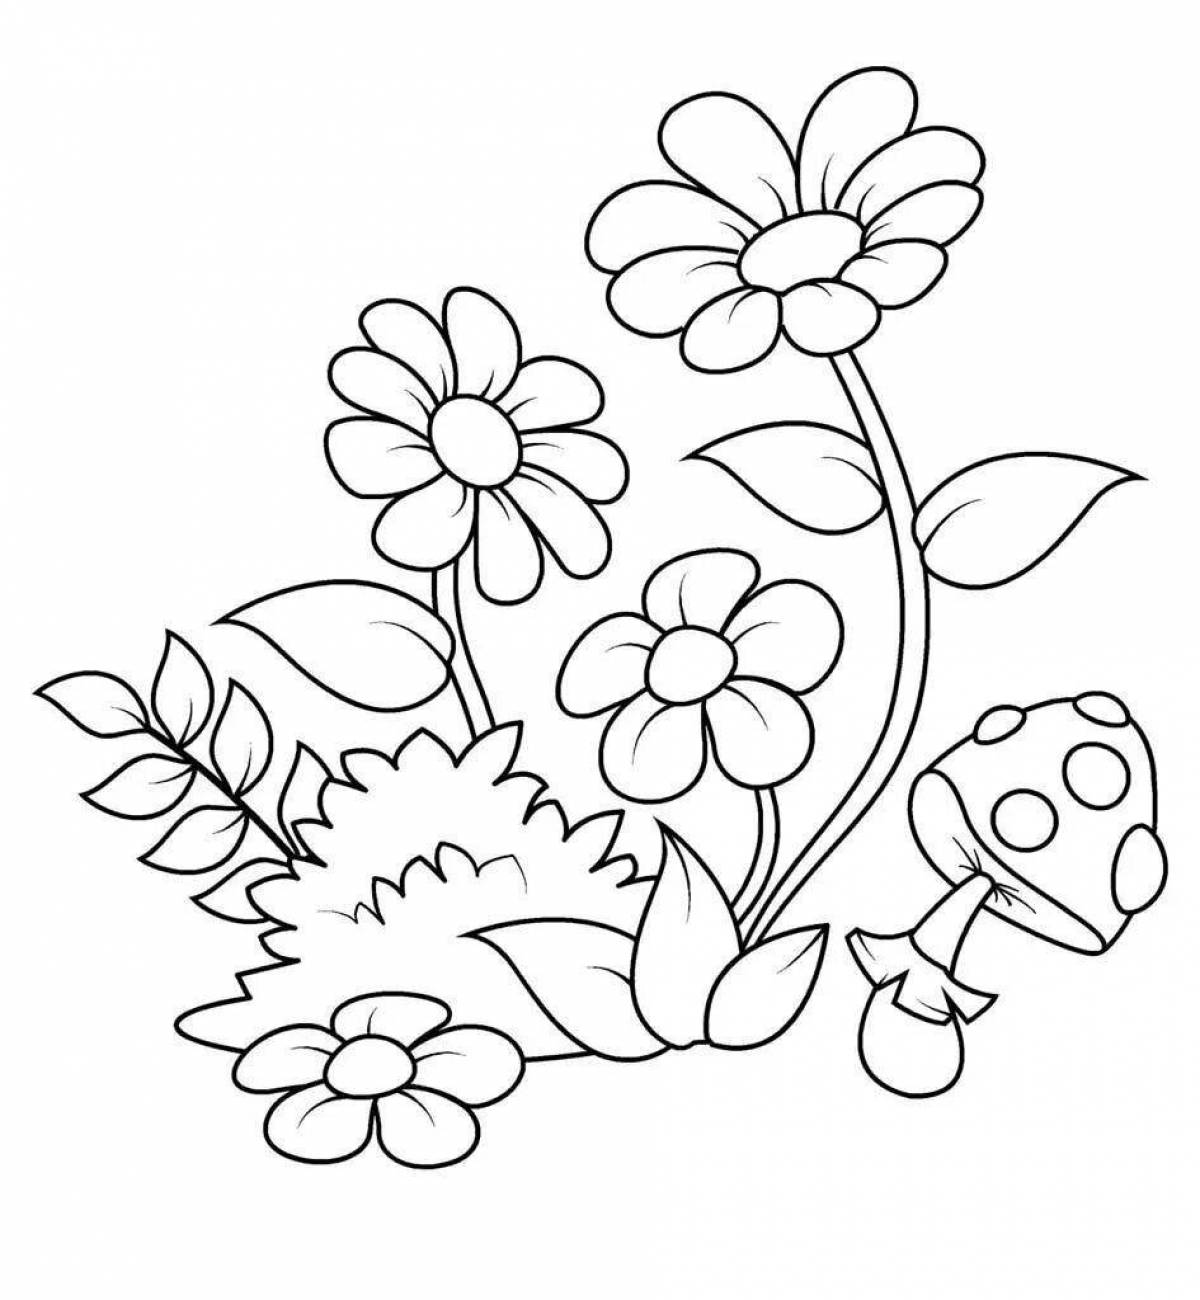 Coloring pages with funny plants for kids